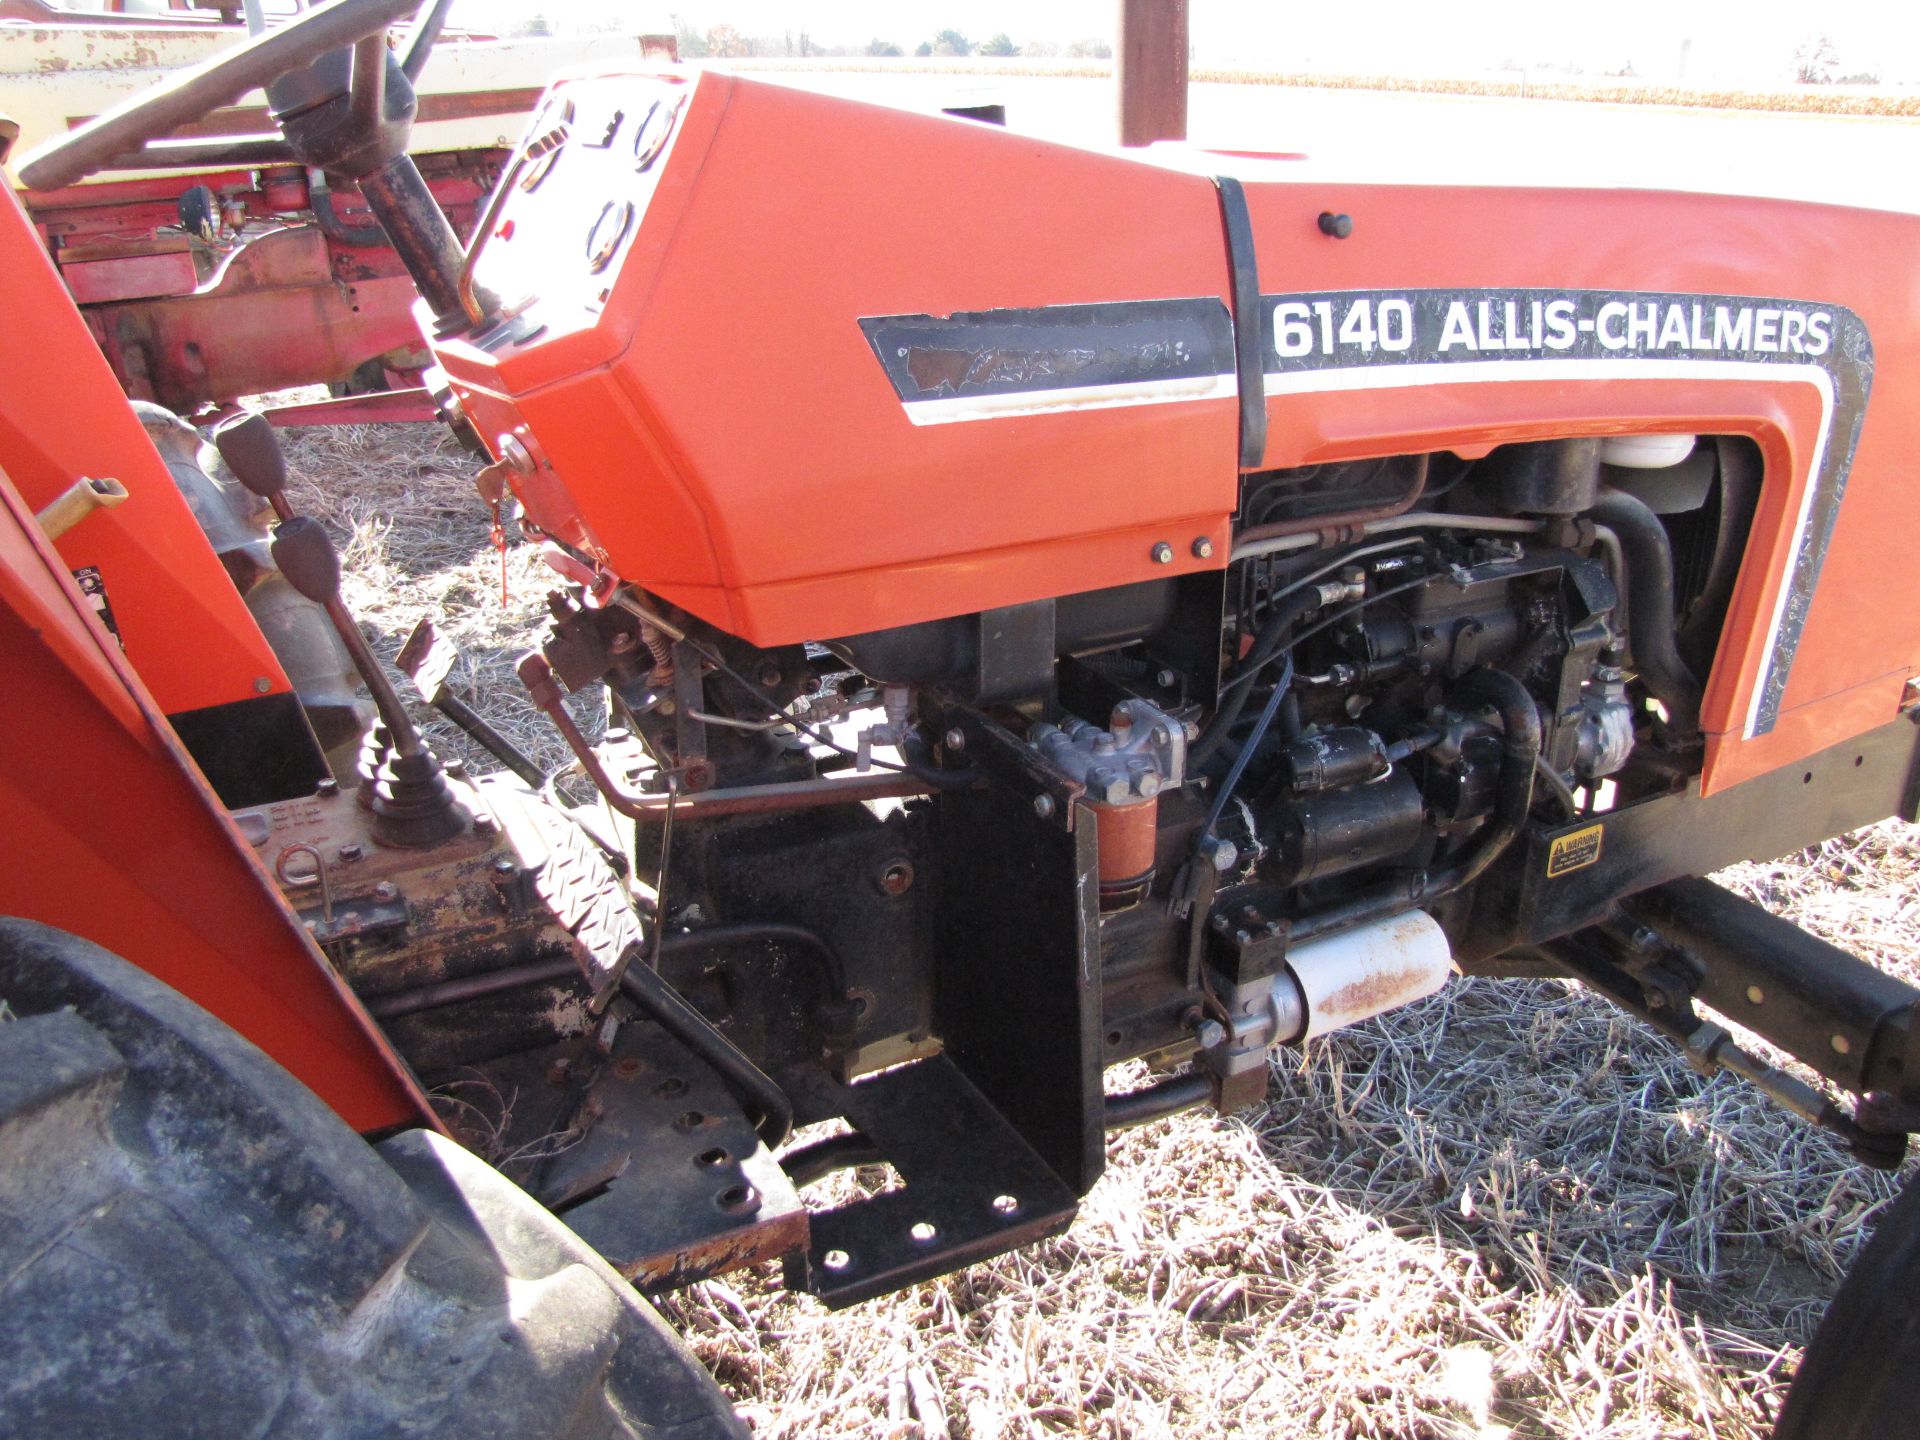 Allis-Chalmers 6140 Tractor - Image 35 of 43